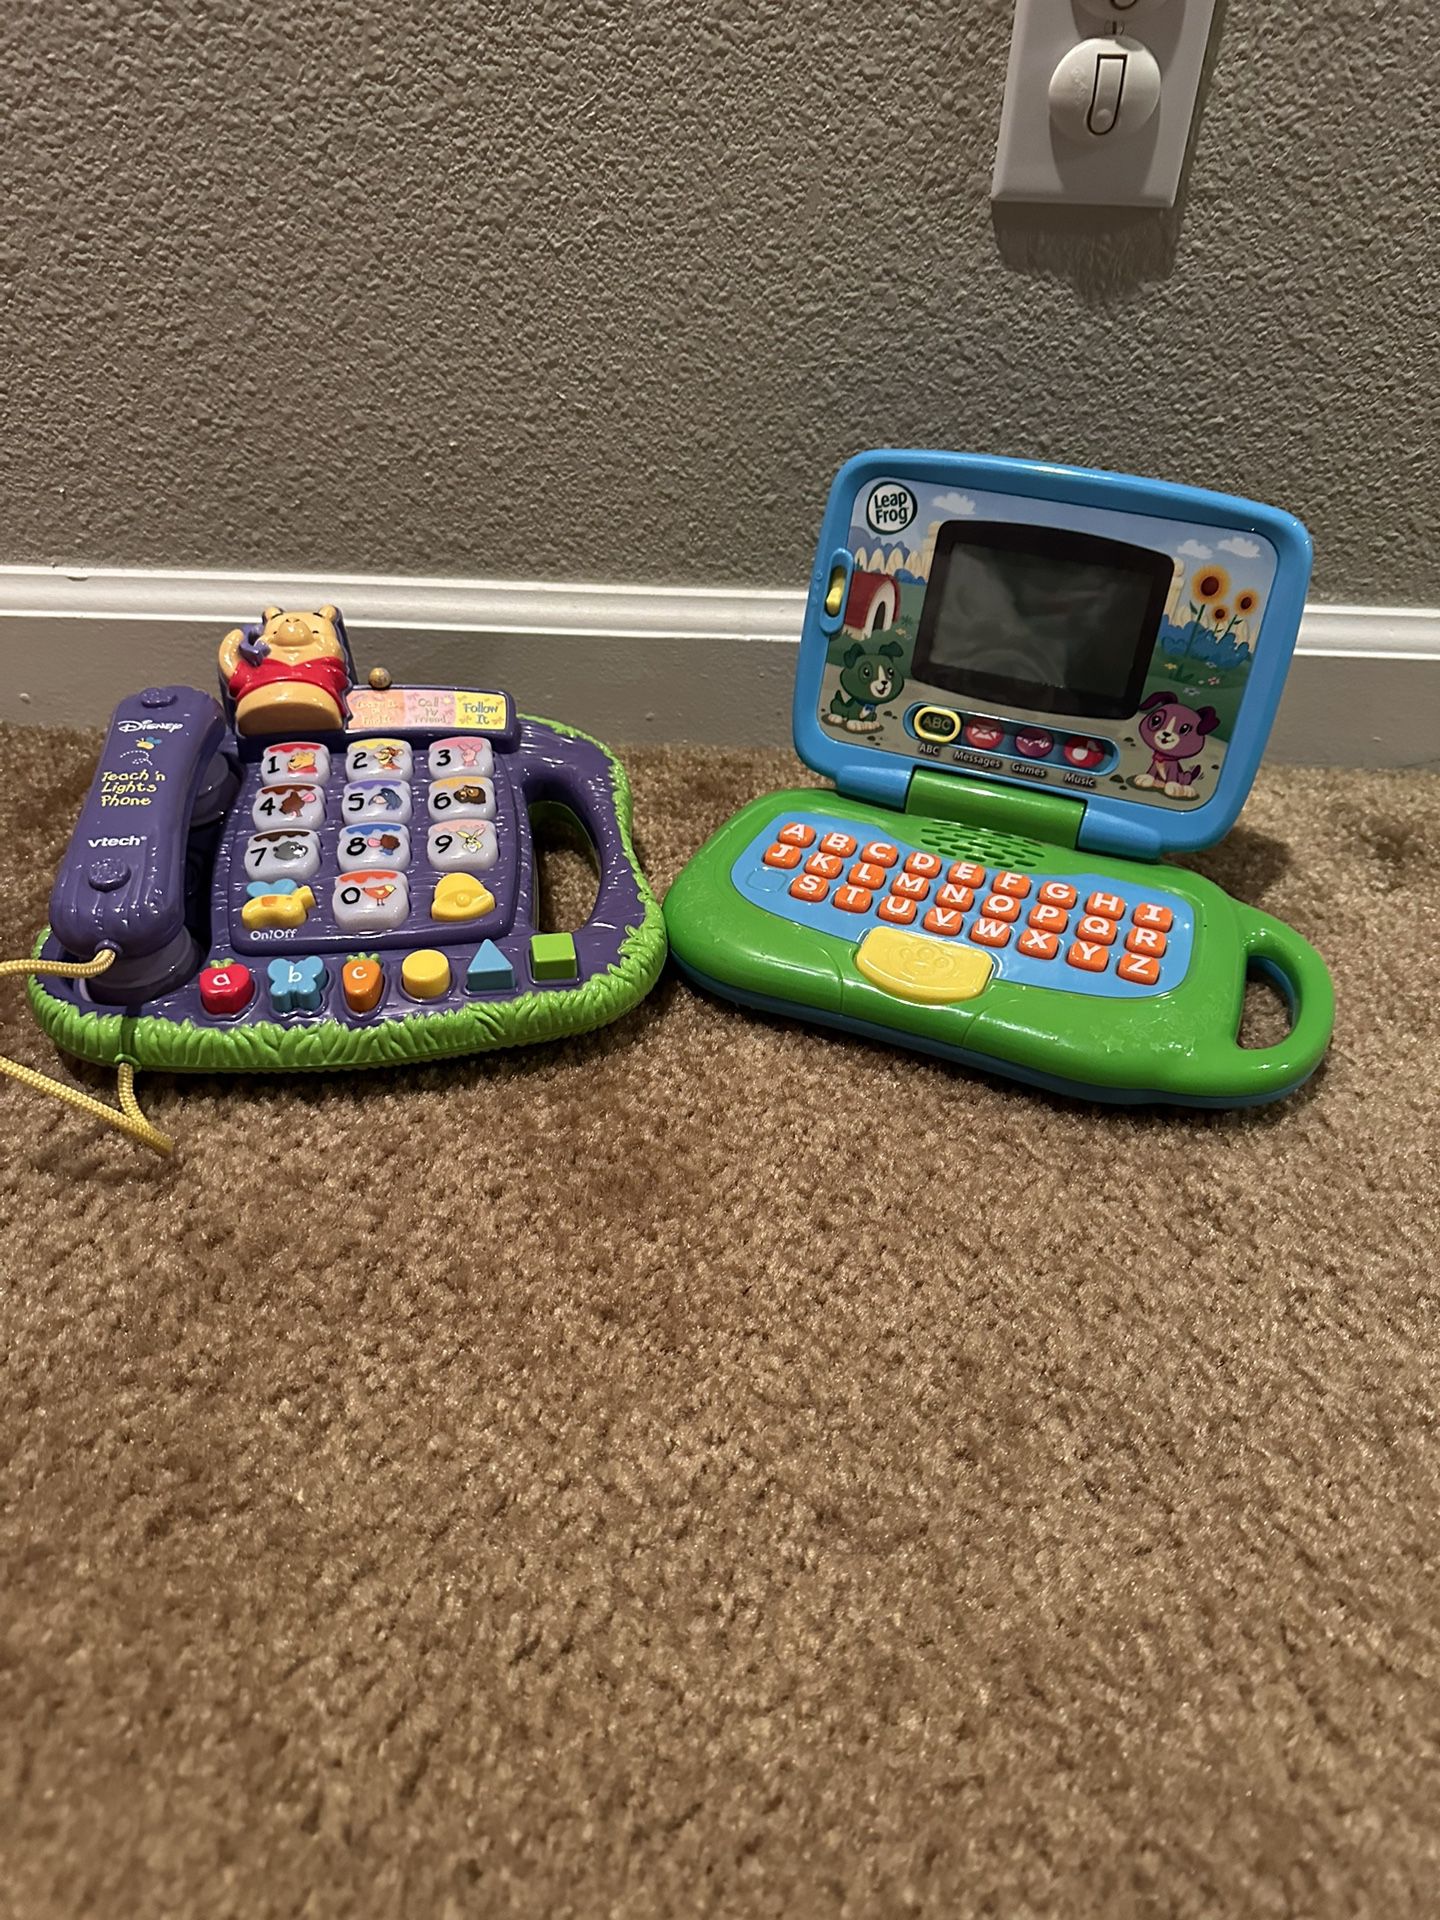 Leap Frog Folding Tablet & Winnie the Pooh Phone